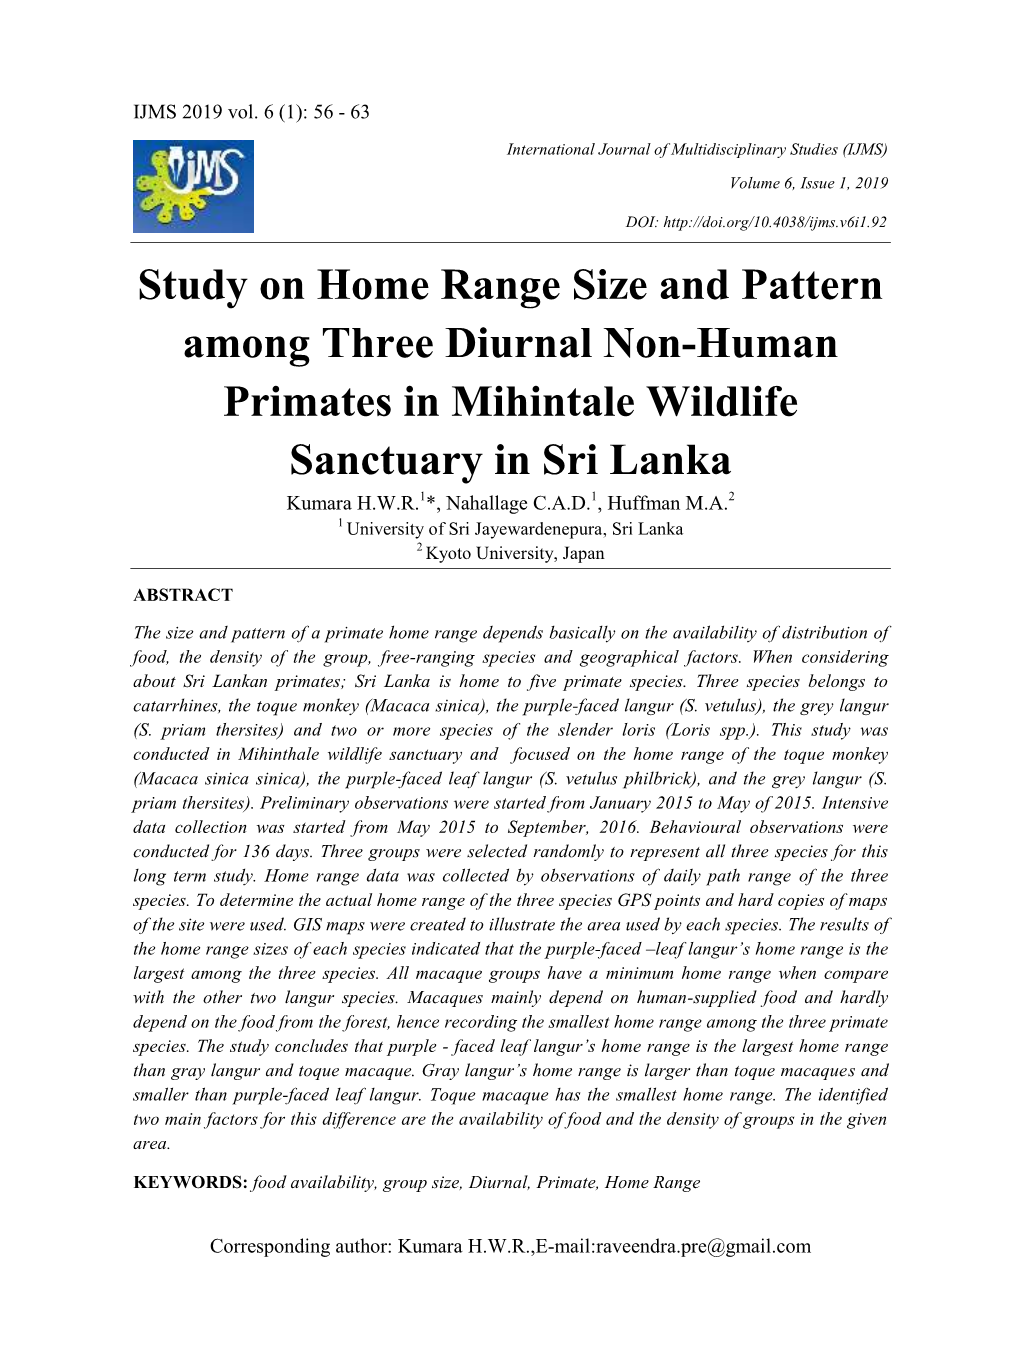 Study on Home Range Size and Pattern Among Three Diurnal Non